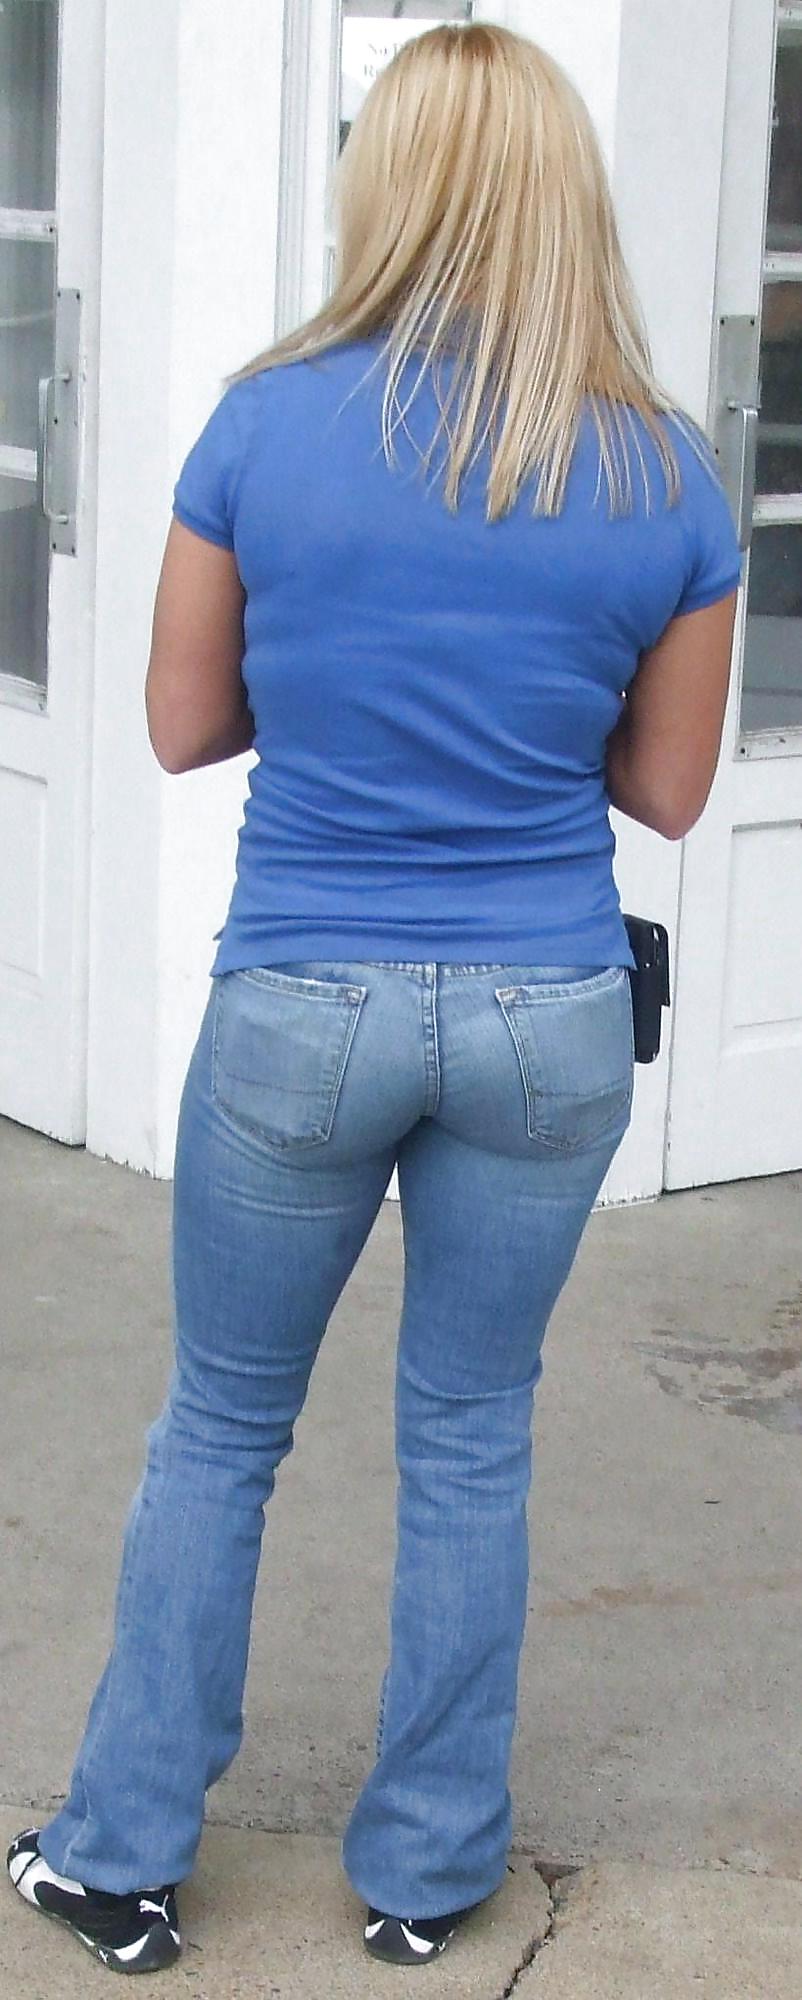 Nice Ass in Blue Jeans  #9980571